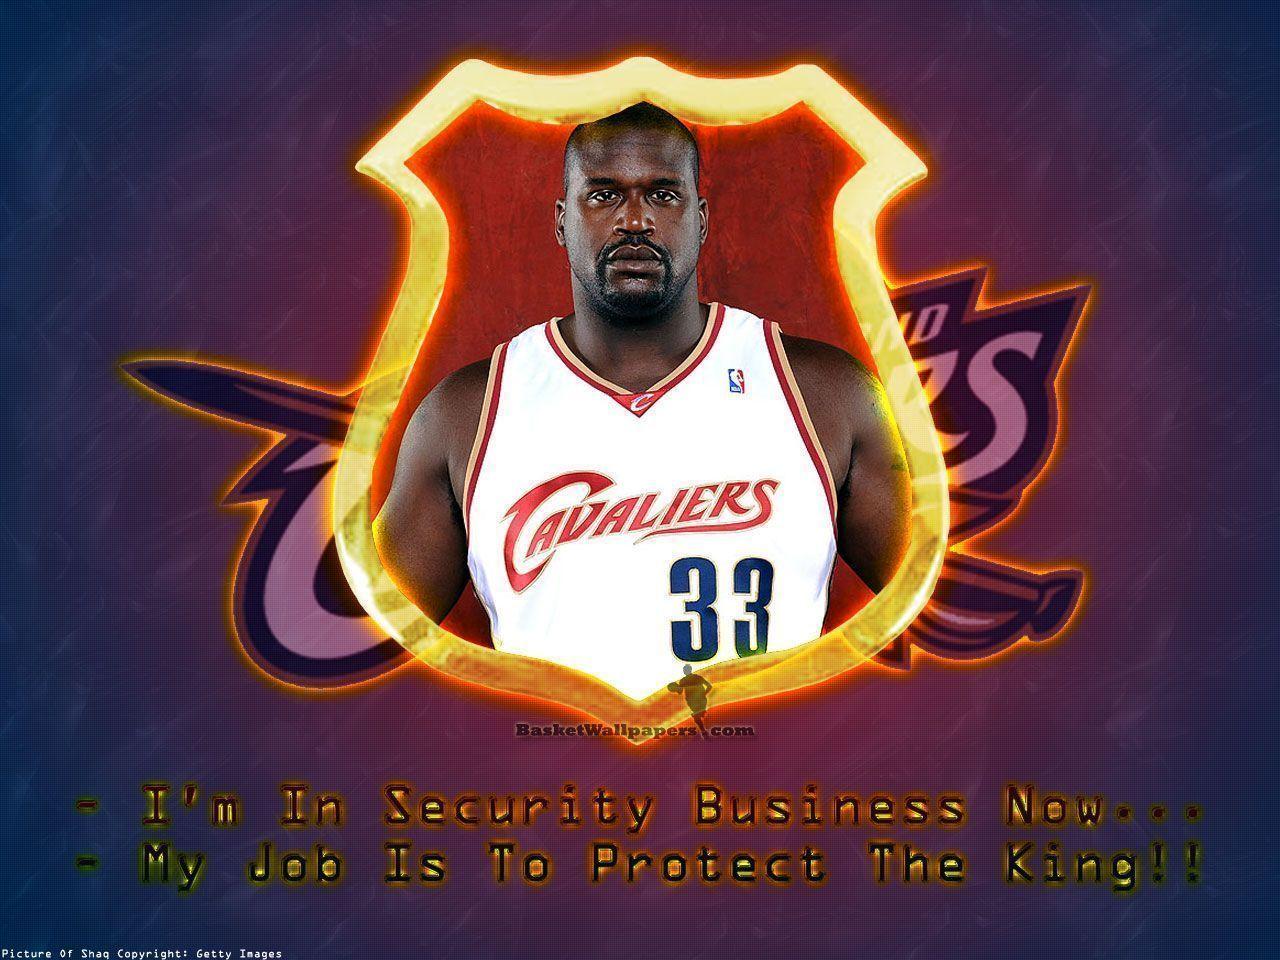 Shaquille ONeal Cavaliers Wallpaper. Basketball Wallpaper at